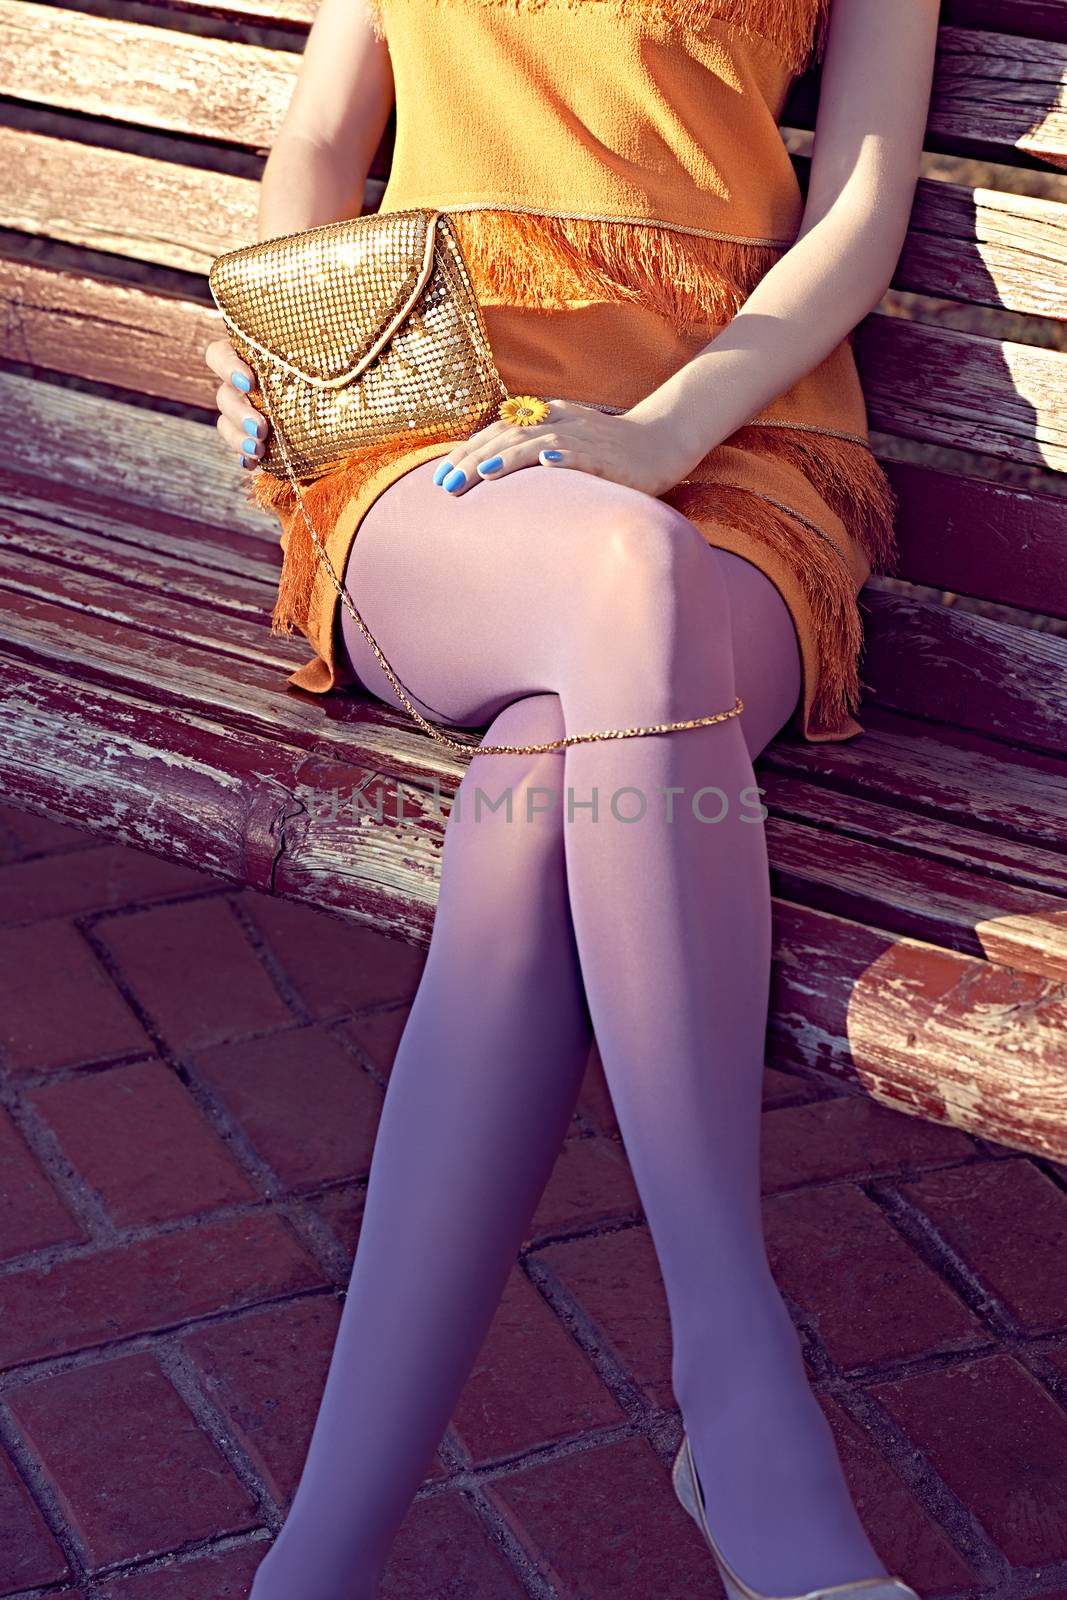 Fashion urban beauty people, woman, outdoor. Playful glamor hipster girl on bench in pantyhose, stylish orange dress with gold clutch, sunny day. Creative unusual pose, lifestyle. Vivid disco party 